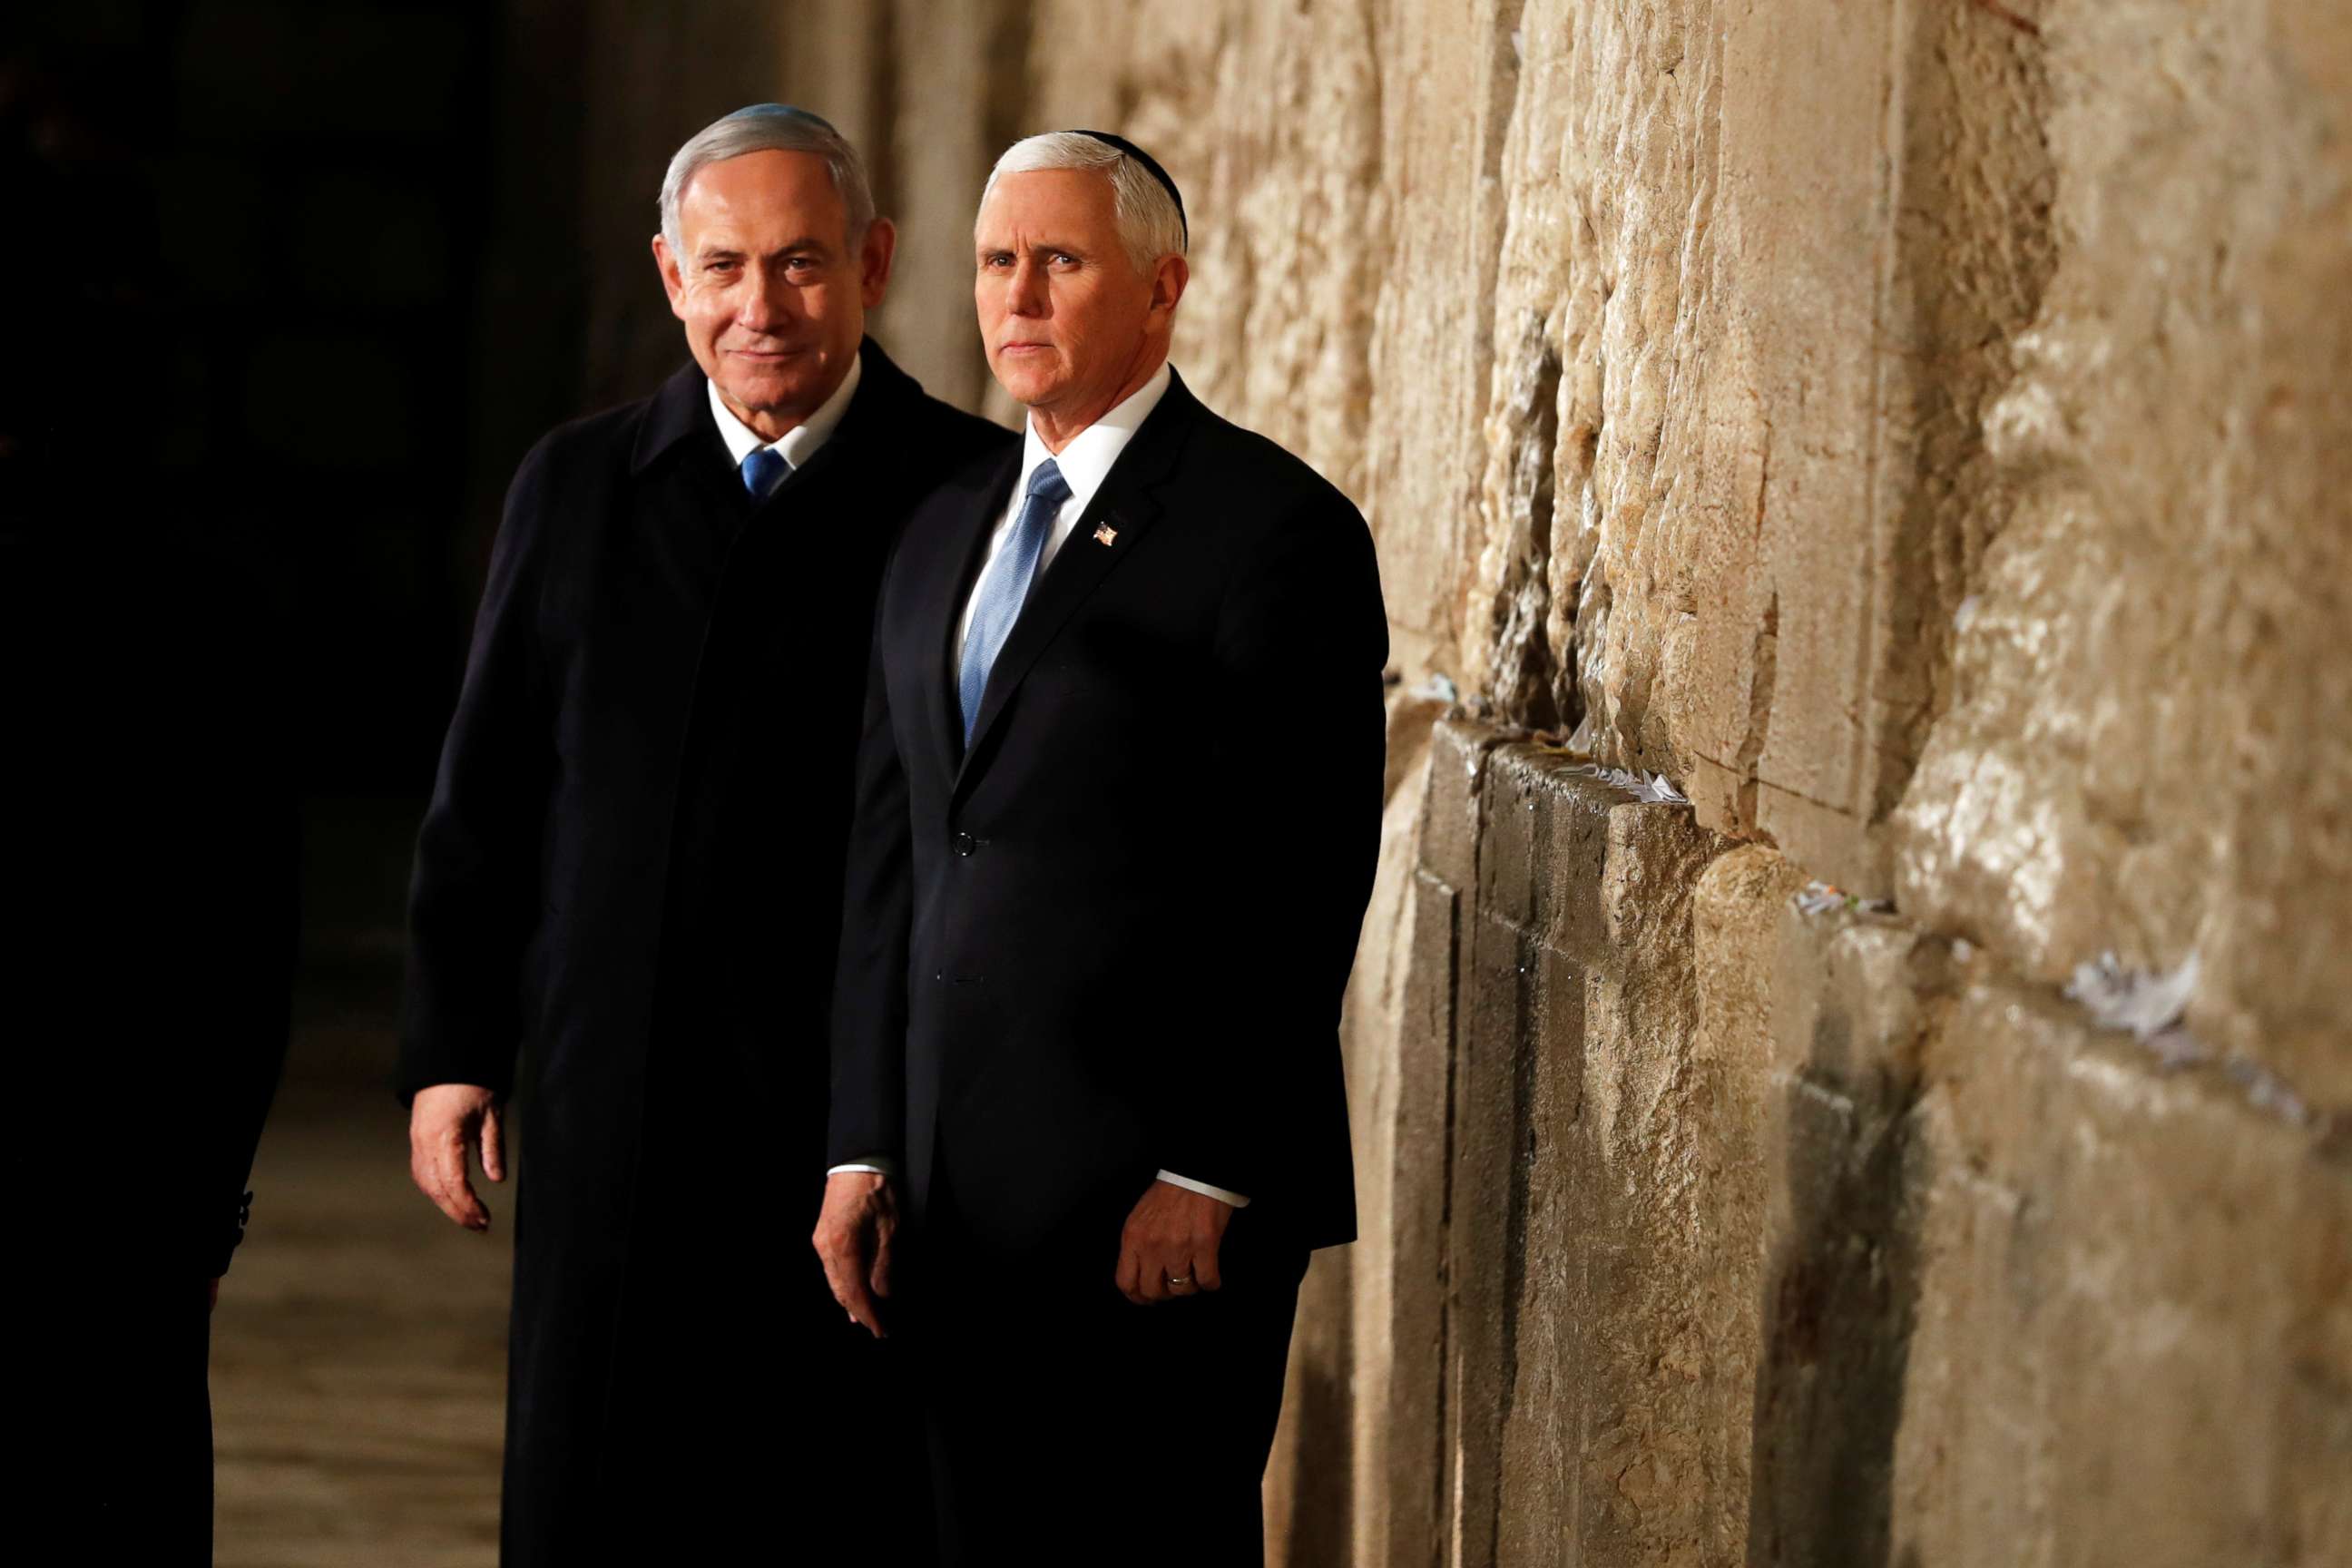 PHOTO: Vice President Mike Pence stands next to Israeli Prime Minister Benjamin Netanyahu during a visit to the Western Wall in Jerusalem's Old City on Jan. 23, 2020.